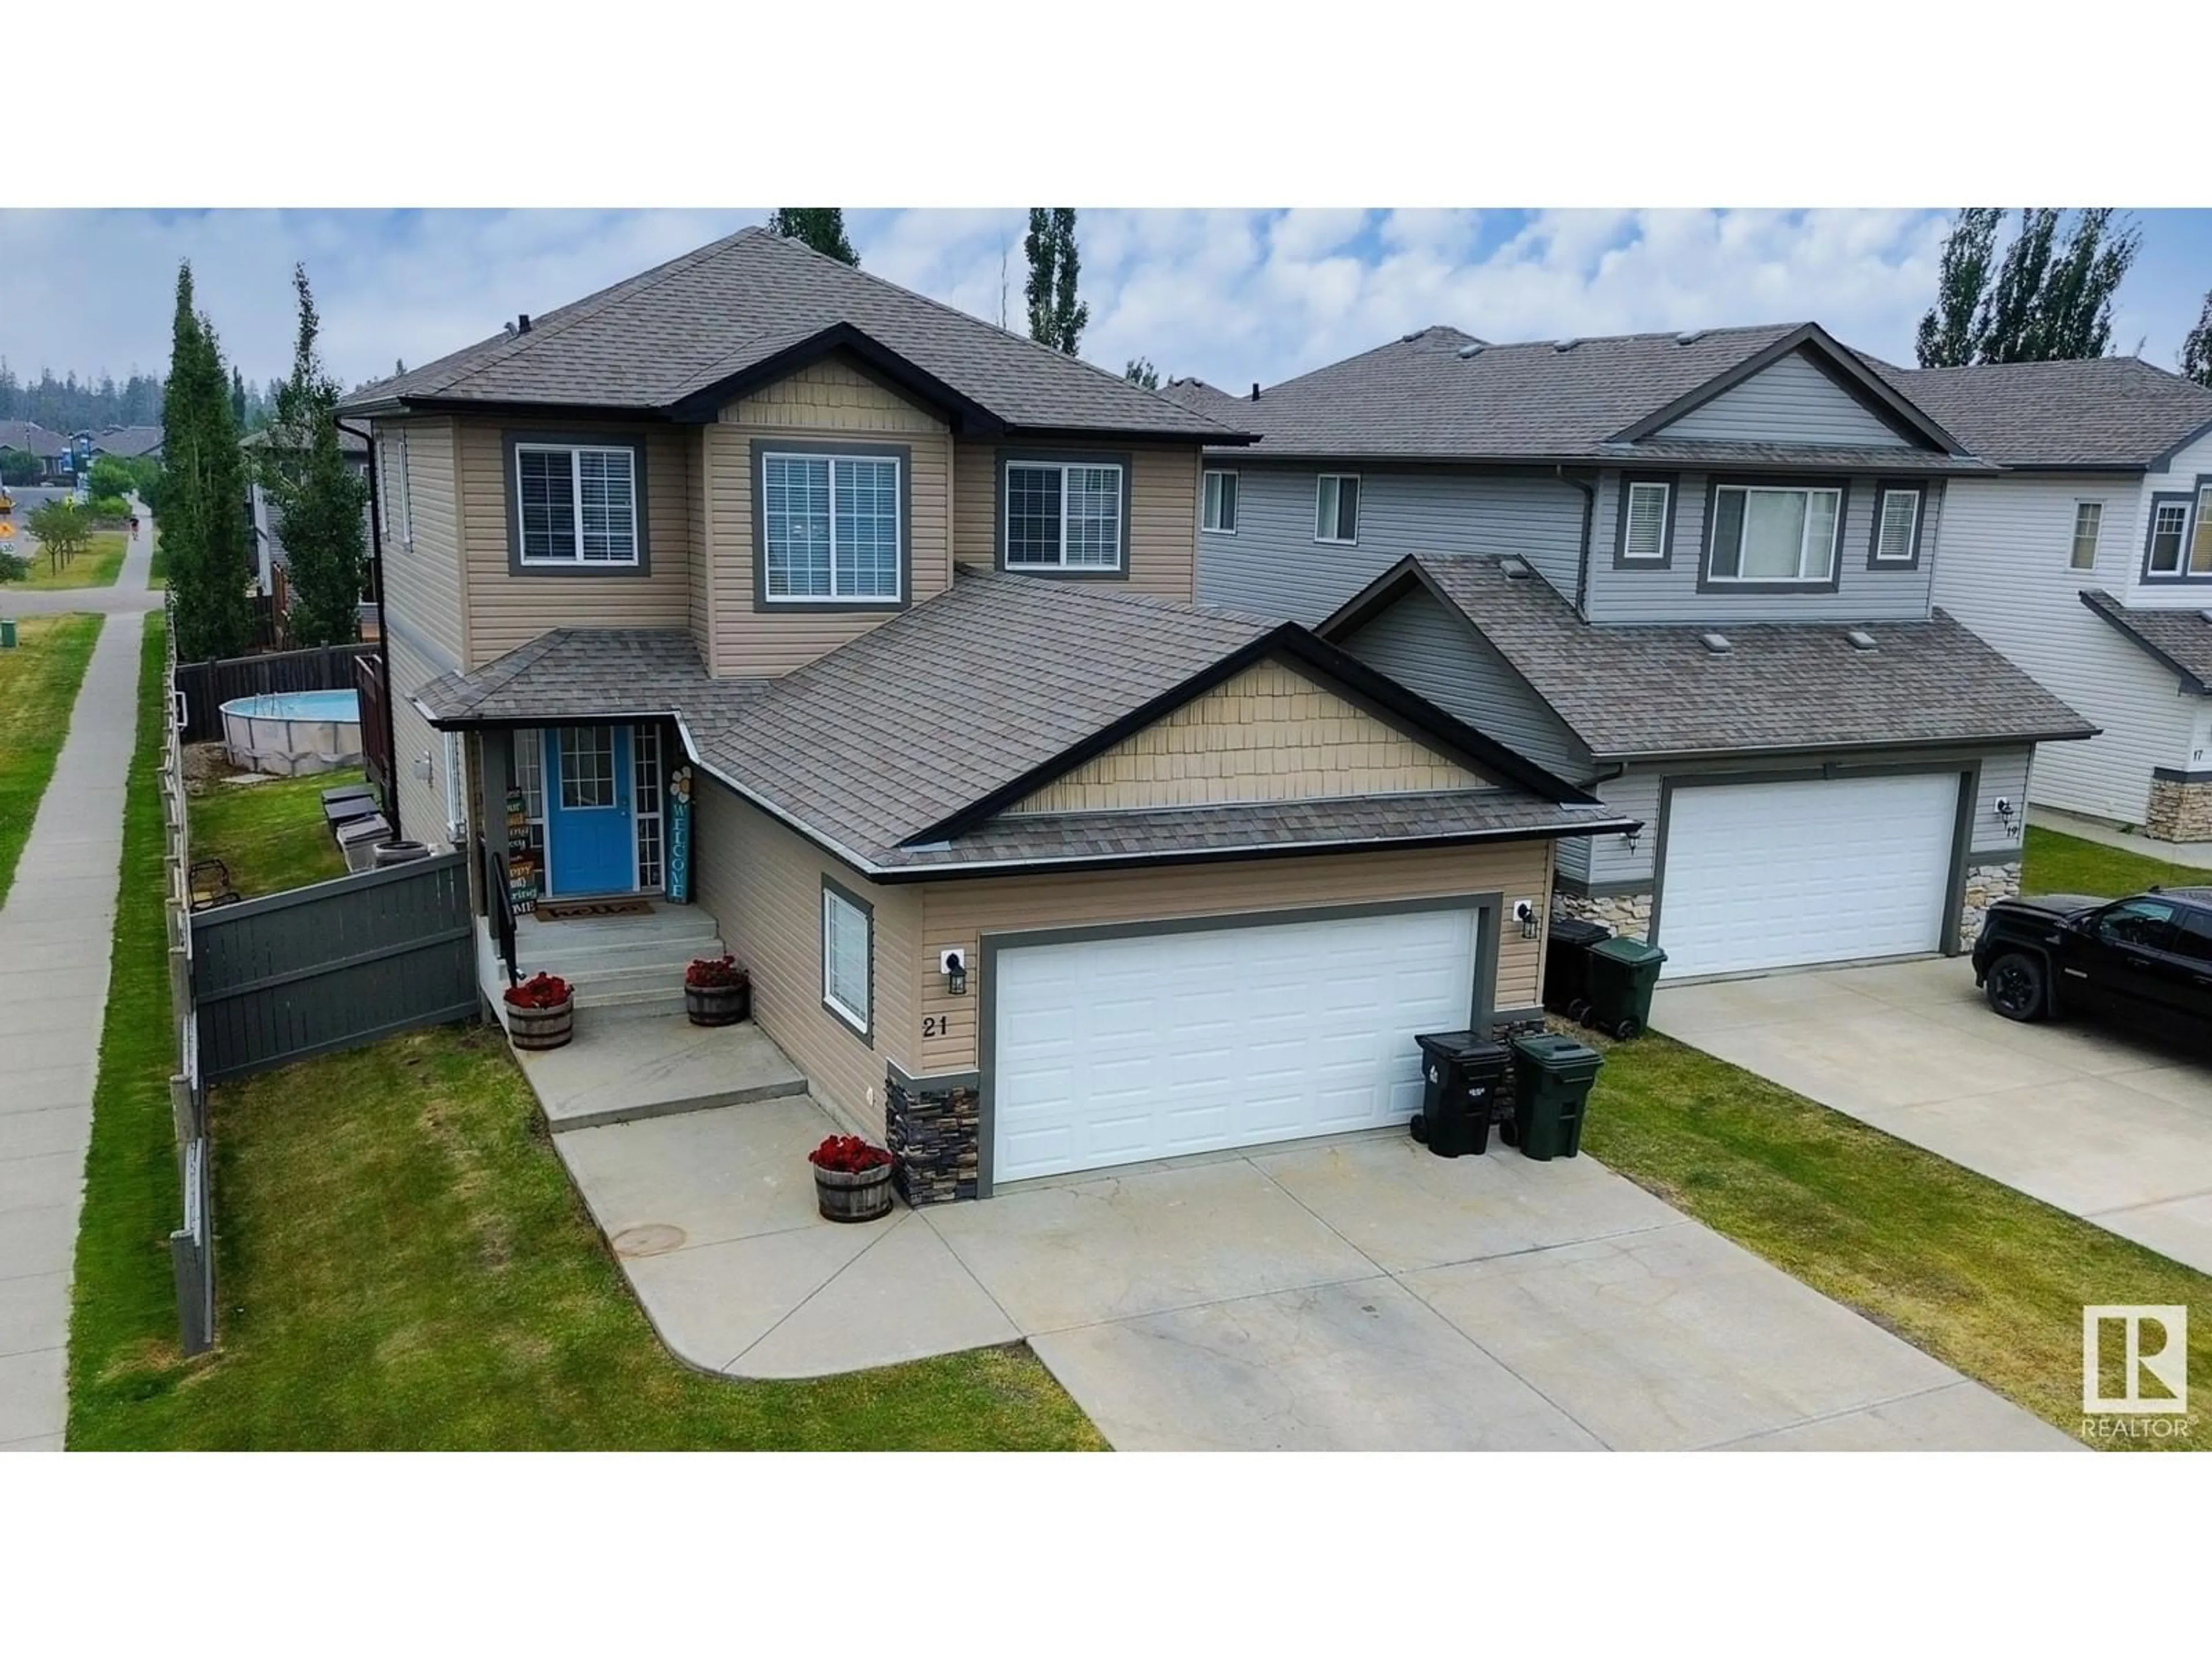 Frontside or backside of a home for 21 HAZELDEAN PT, Spruce Grove Alberta T7X0H7